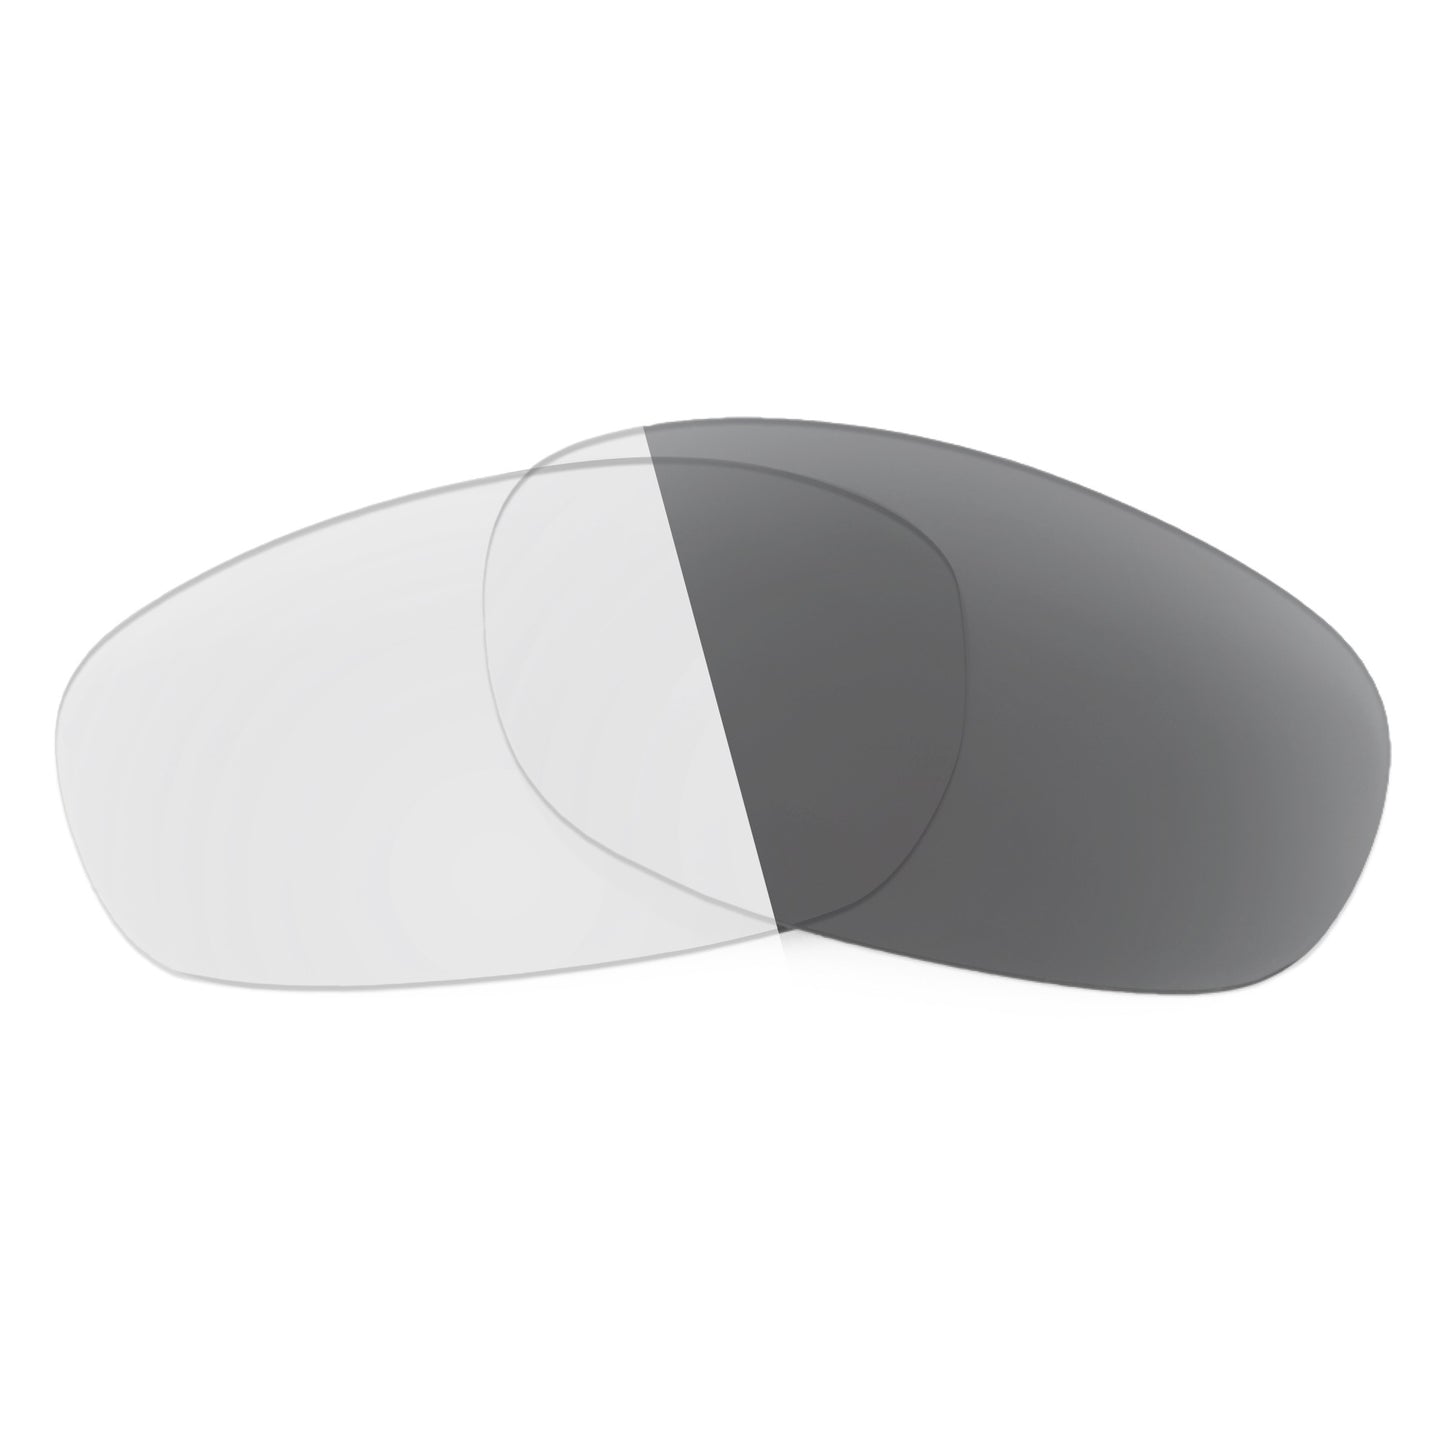 Revant replacement lenses for Ray-Ban RB3534 59mm Non-Polarized Adapt Gray Photochromic